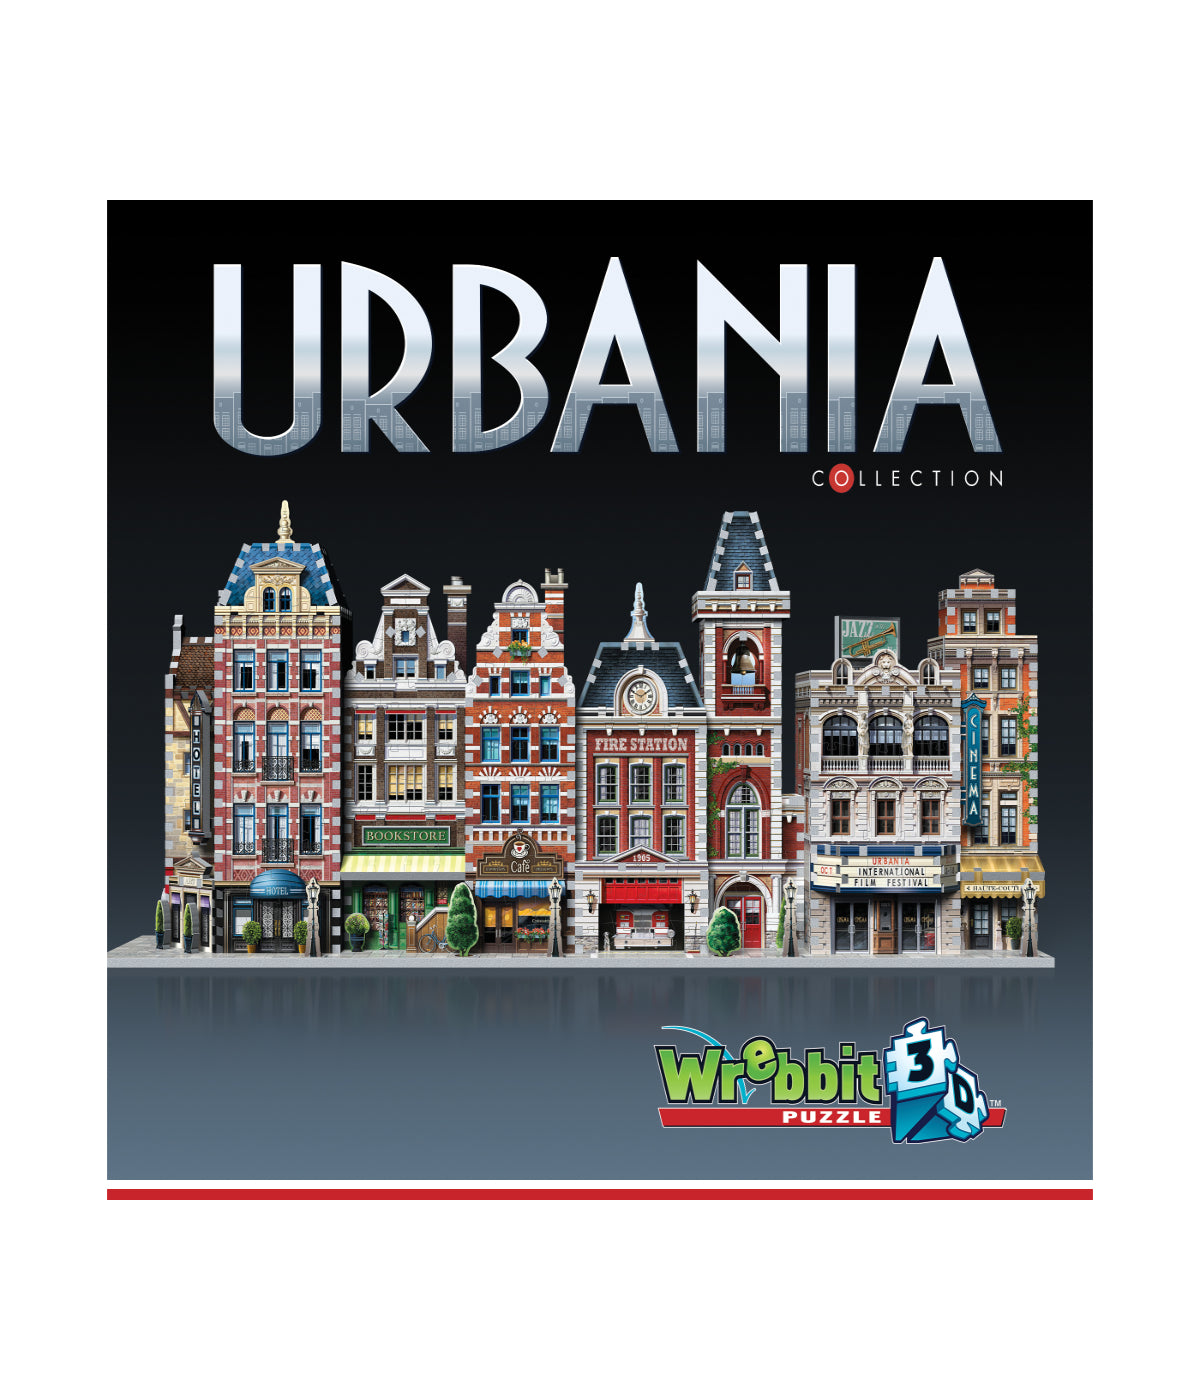 Urbania Collection - 4 3D Puzzles: Hotel, Cinema, Cafe, and Fire Station: 1165 Pcs Multi